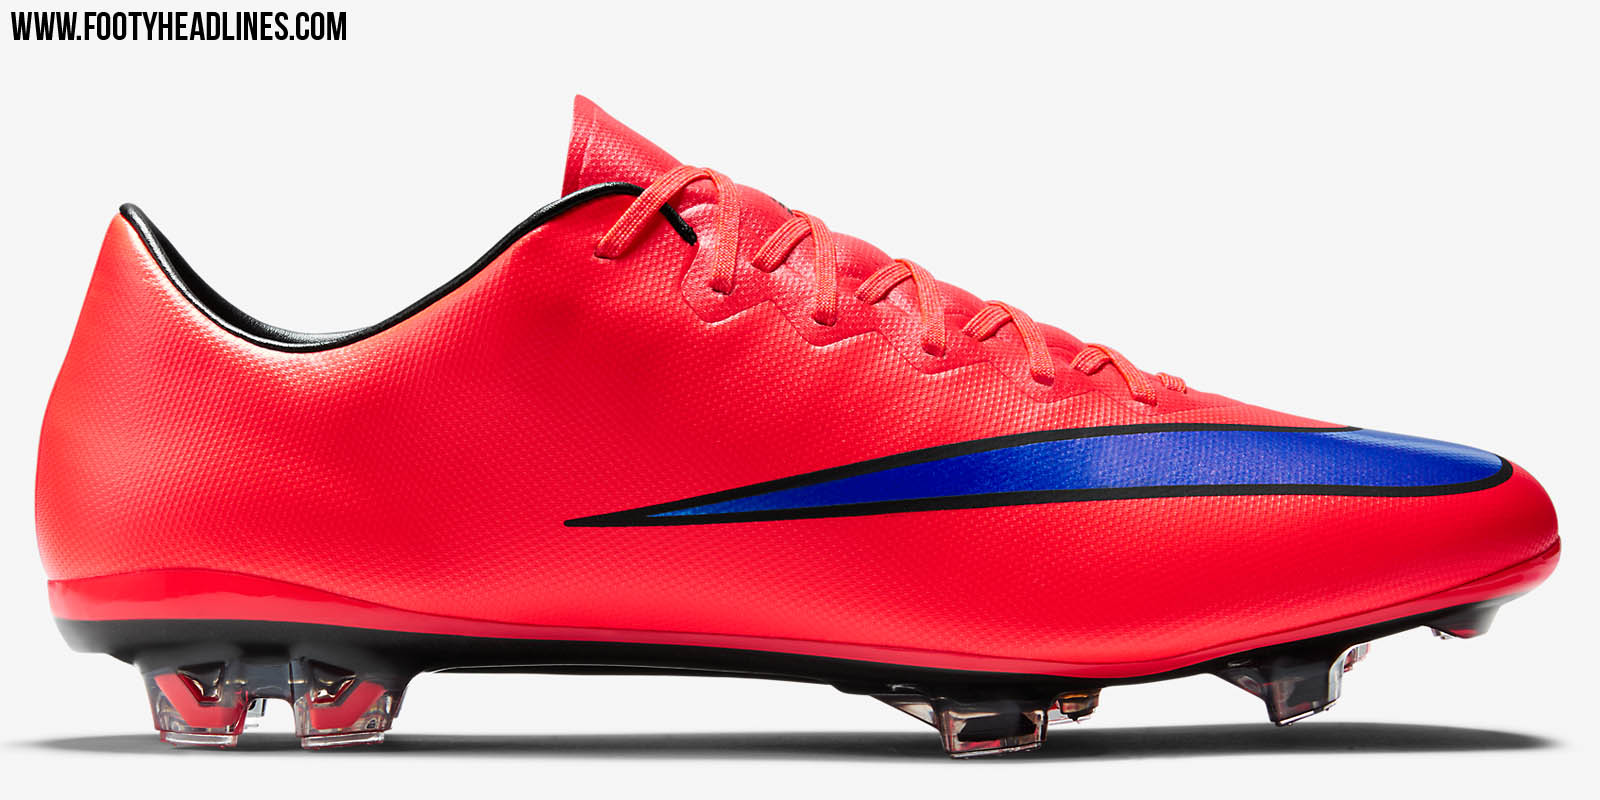 enclosure Garbage can Stick out Red Nike Mercurial Vapor X Summer 2015 Boots Released - Footy Headlines